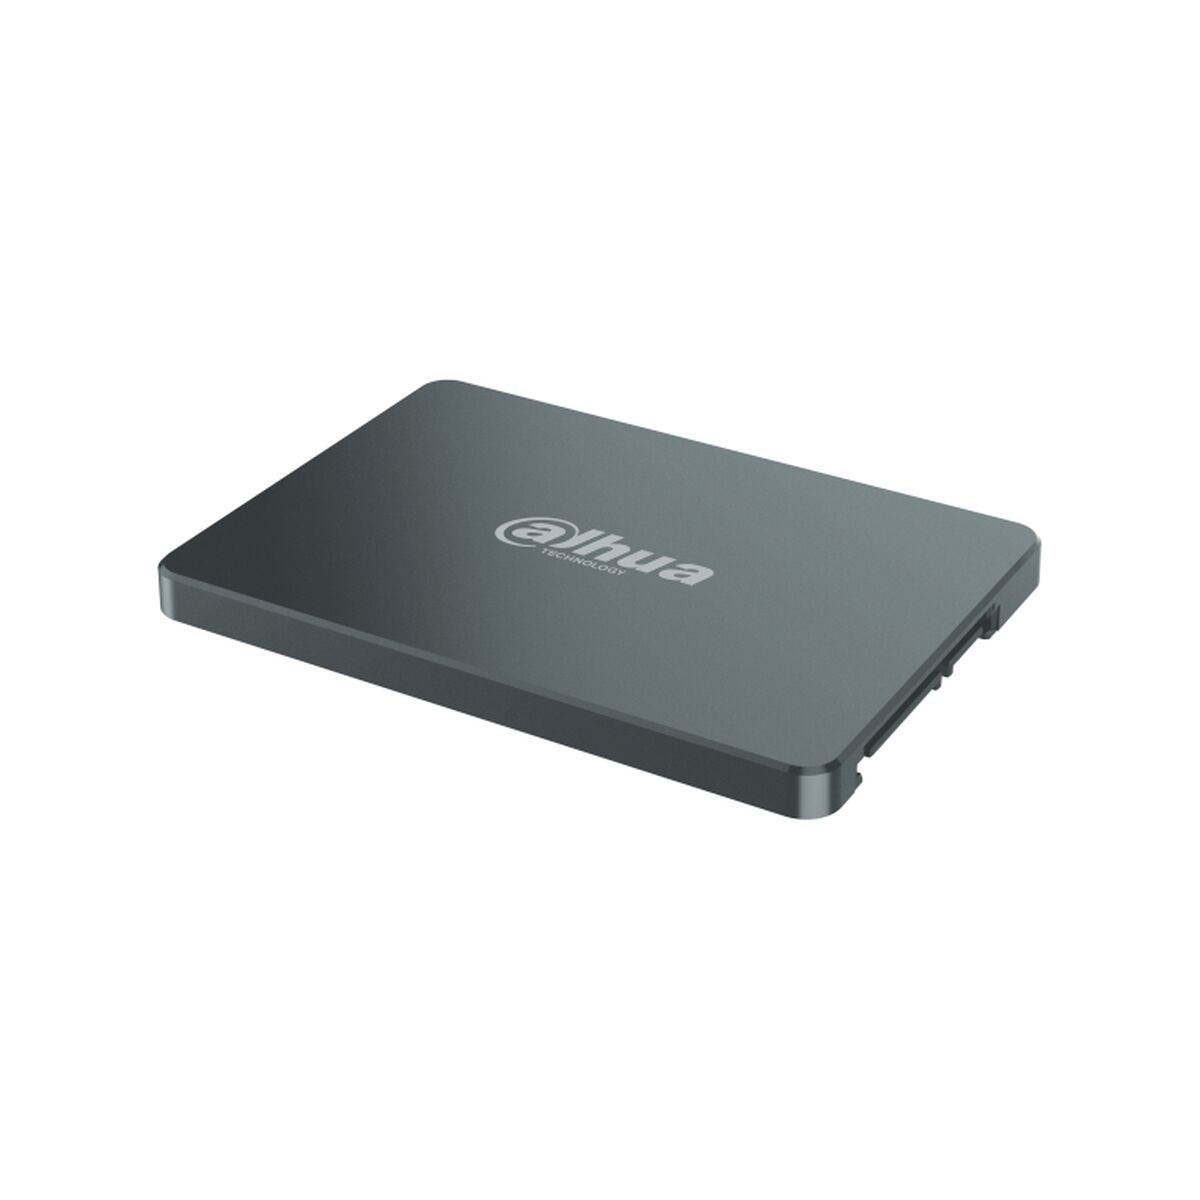 Hard Drive DAHUA TECHNOLOGY SSD-C800AS2TB 2 TB, DAHUA TECHNOLOGY, Computing, Data storage, hard-drive-dahua-technology-ssd-c800as2tb-2-tb, Brand_DAHUA TECHNOLOGY, category-reference-2609, category-reference-2803, category-reference-2806, category-reference-t-19685, category-reference-t-19909, category-reference-t-21357, category-reference-t-25639, computers / components, Condition_NEW, Price_100 - 200, Teleworking, RiotNook